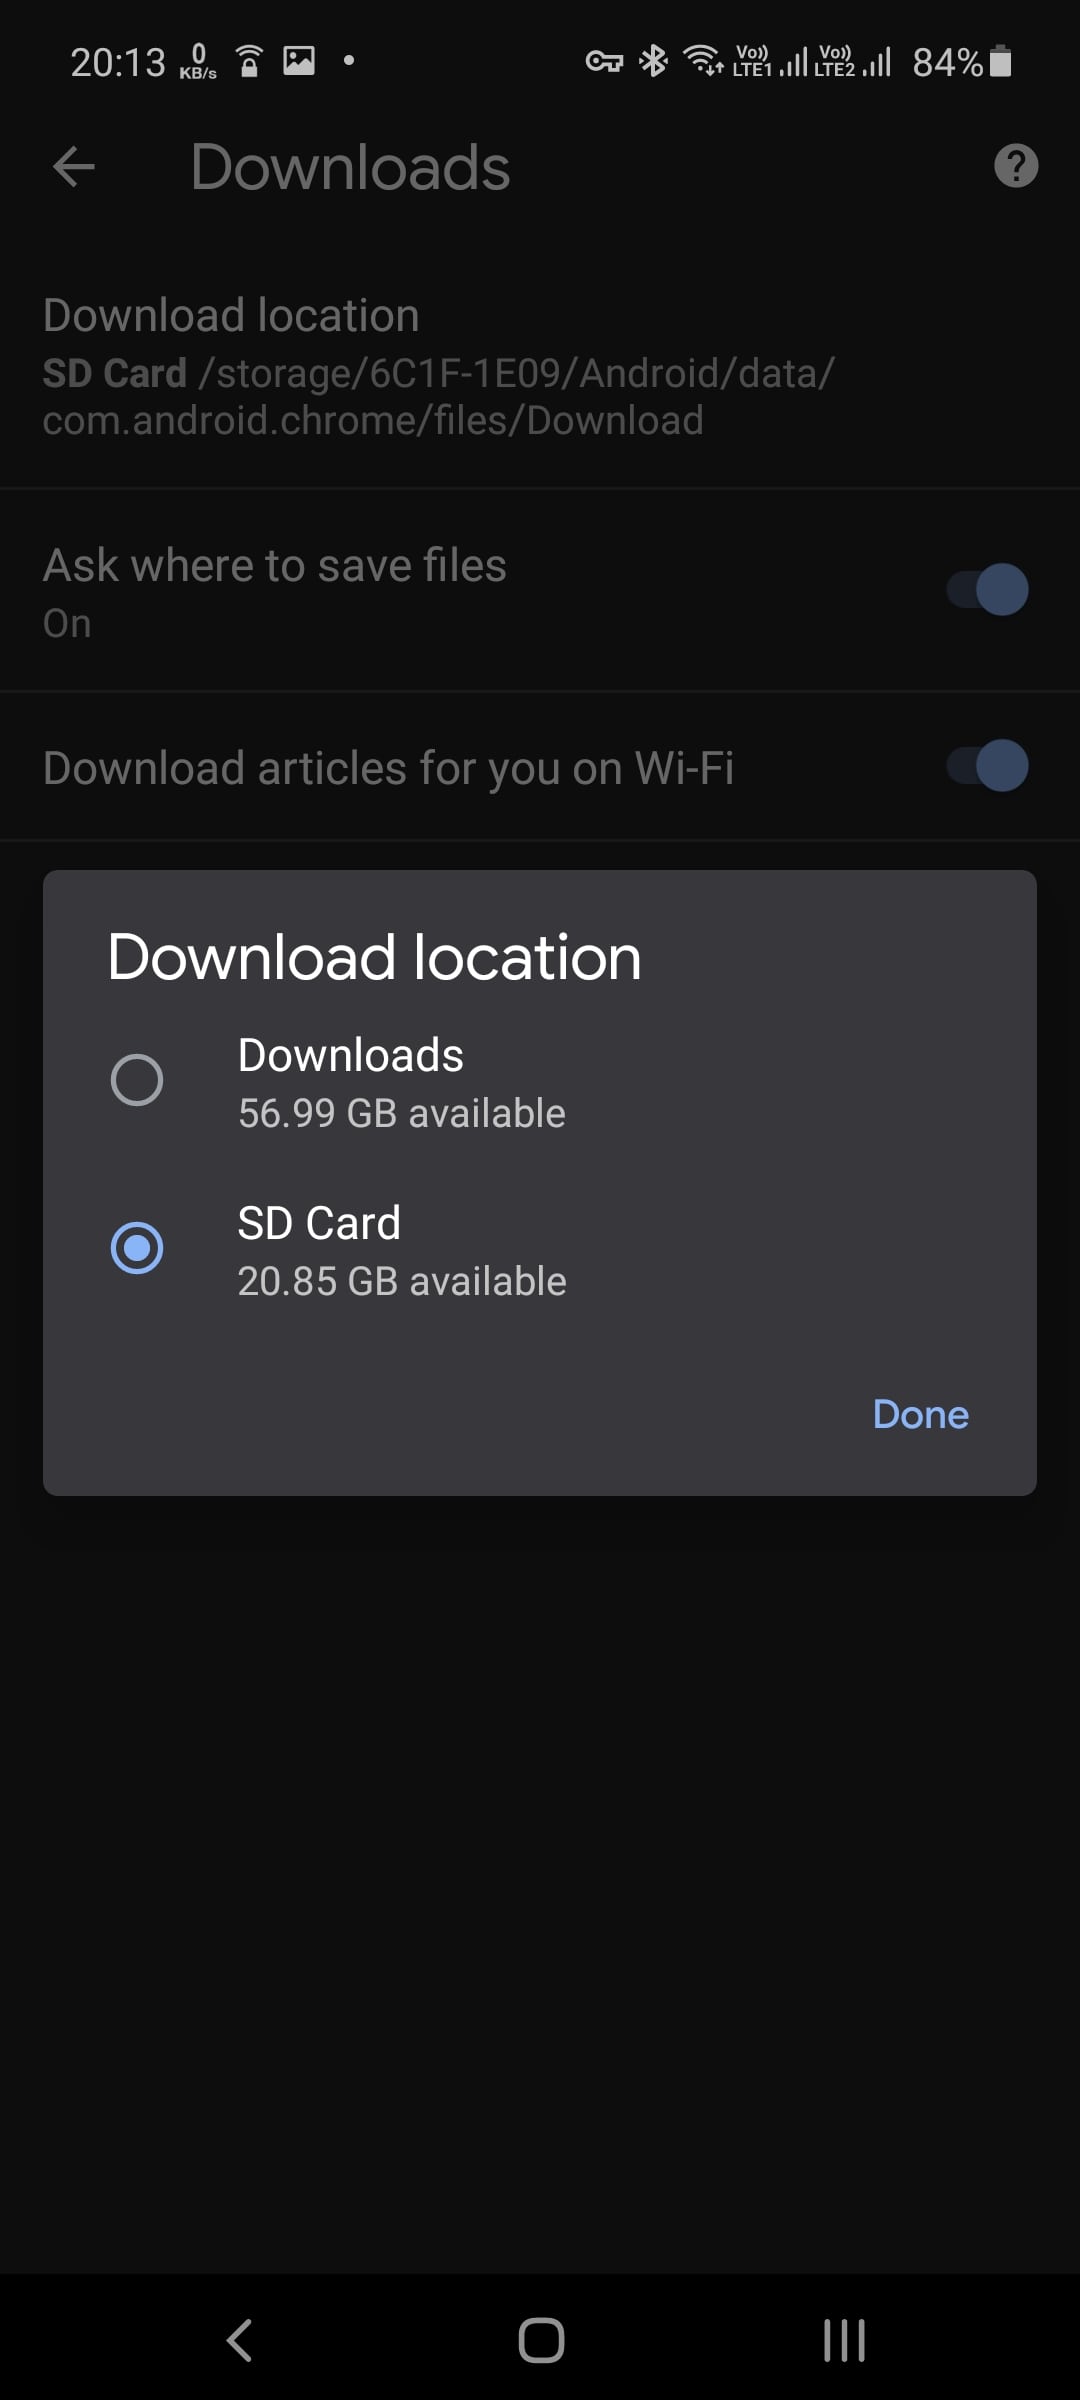 chosen the SD card as your download location